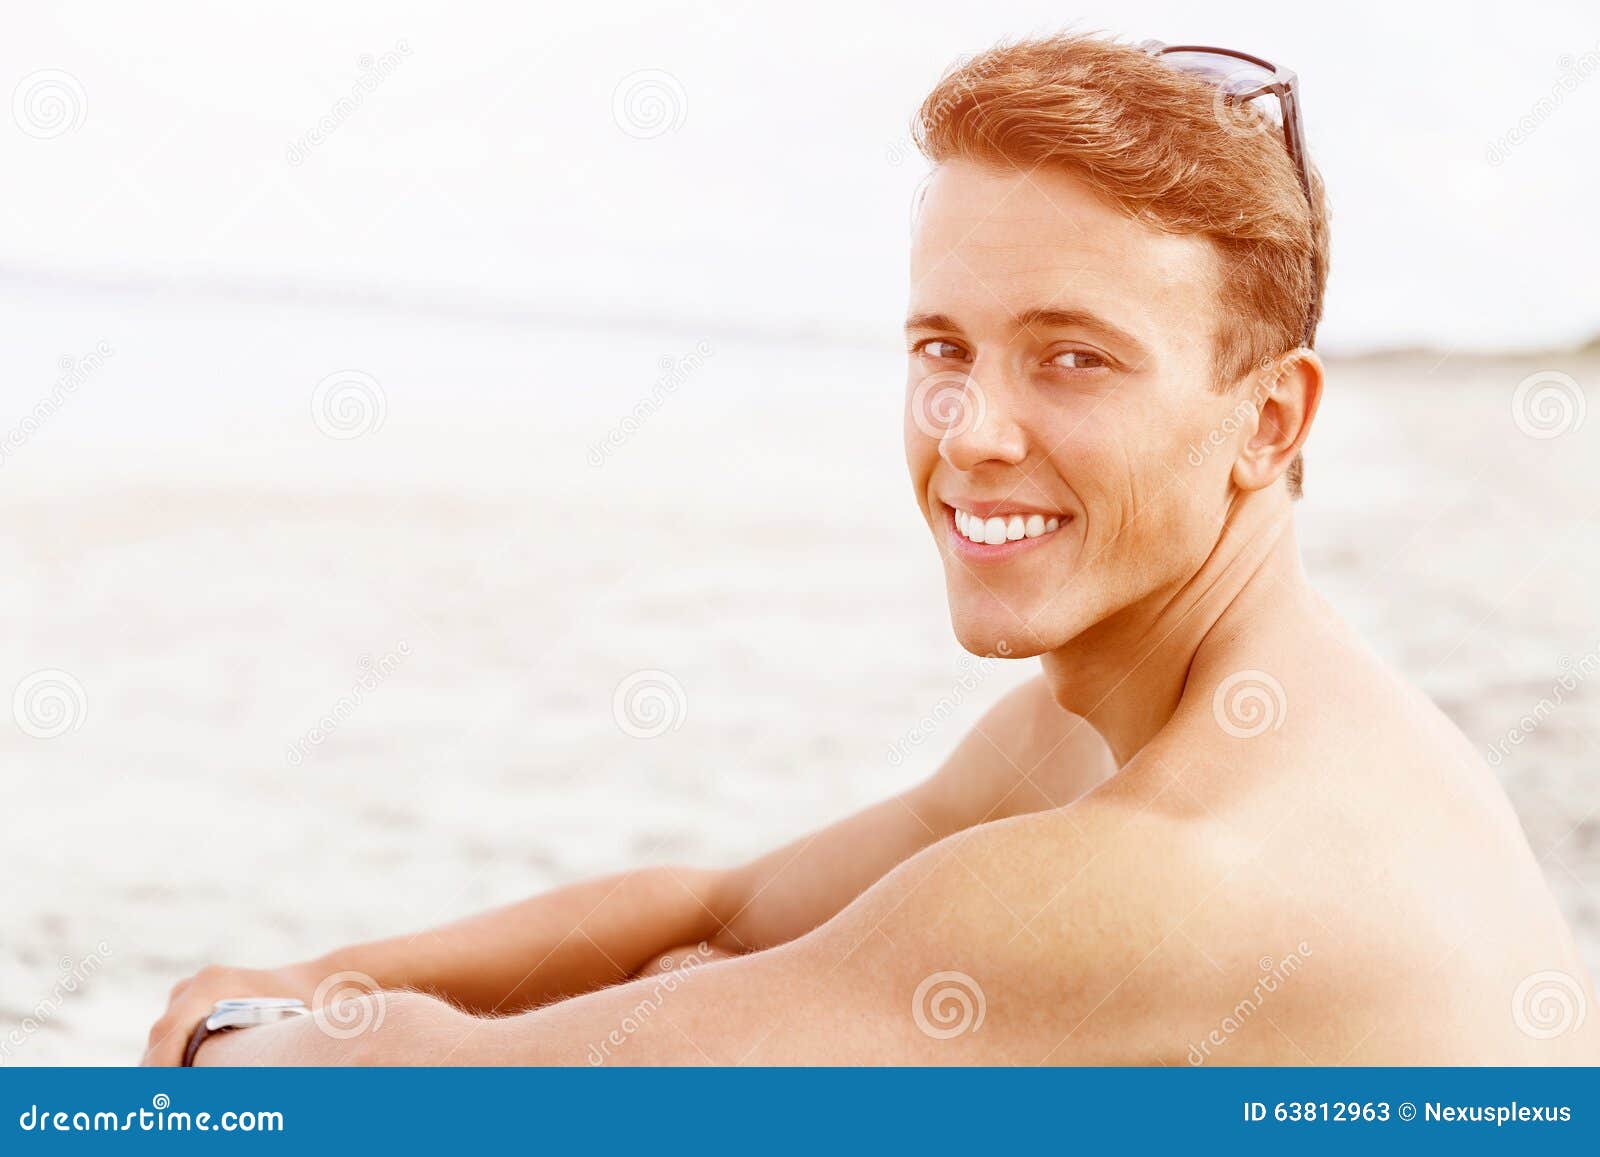 Handsome Man Posing At Beach Stock Image - Image of background, sunny ...